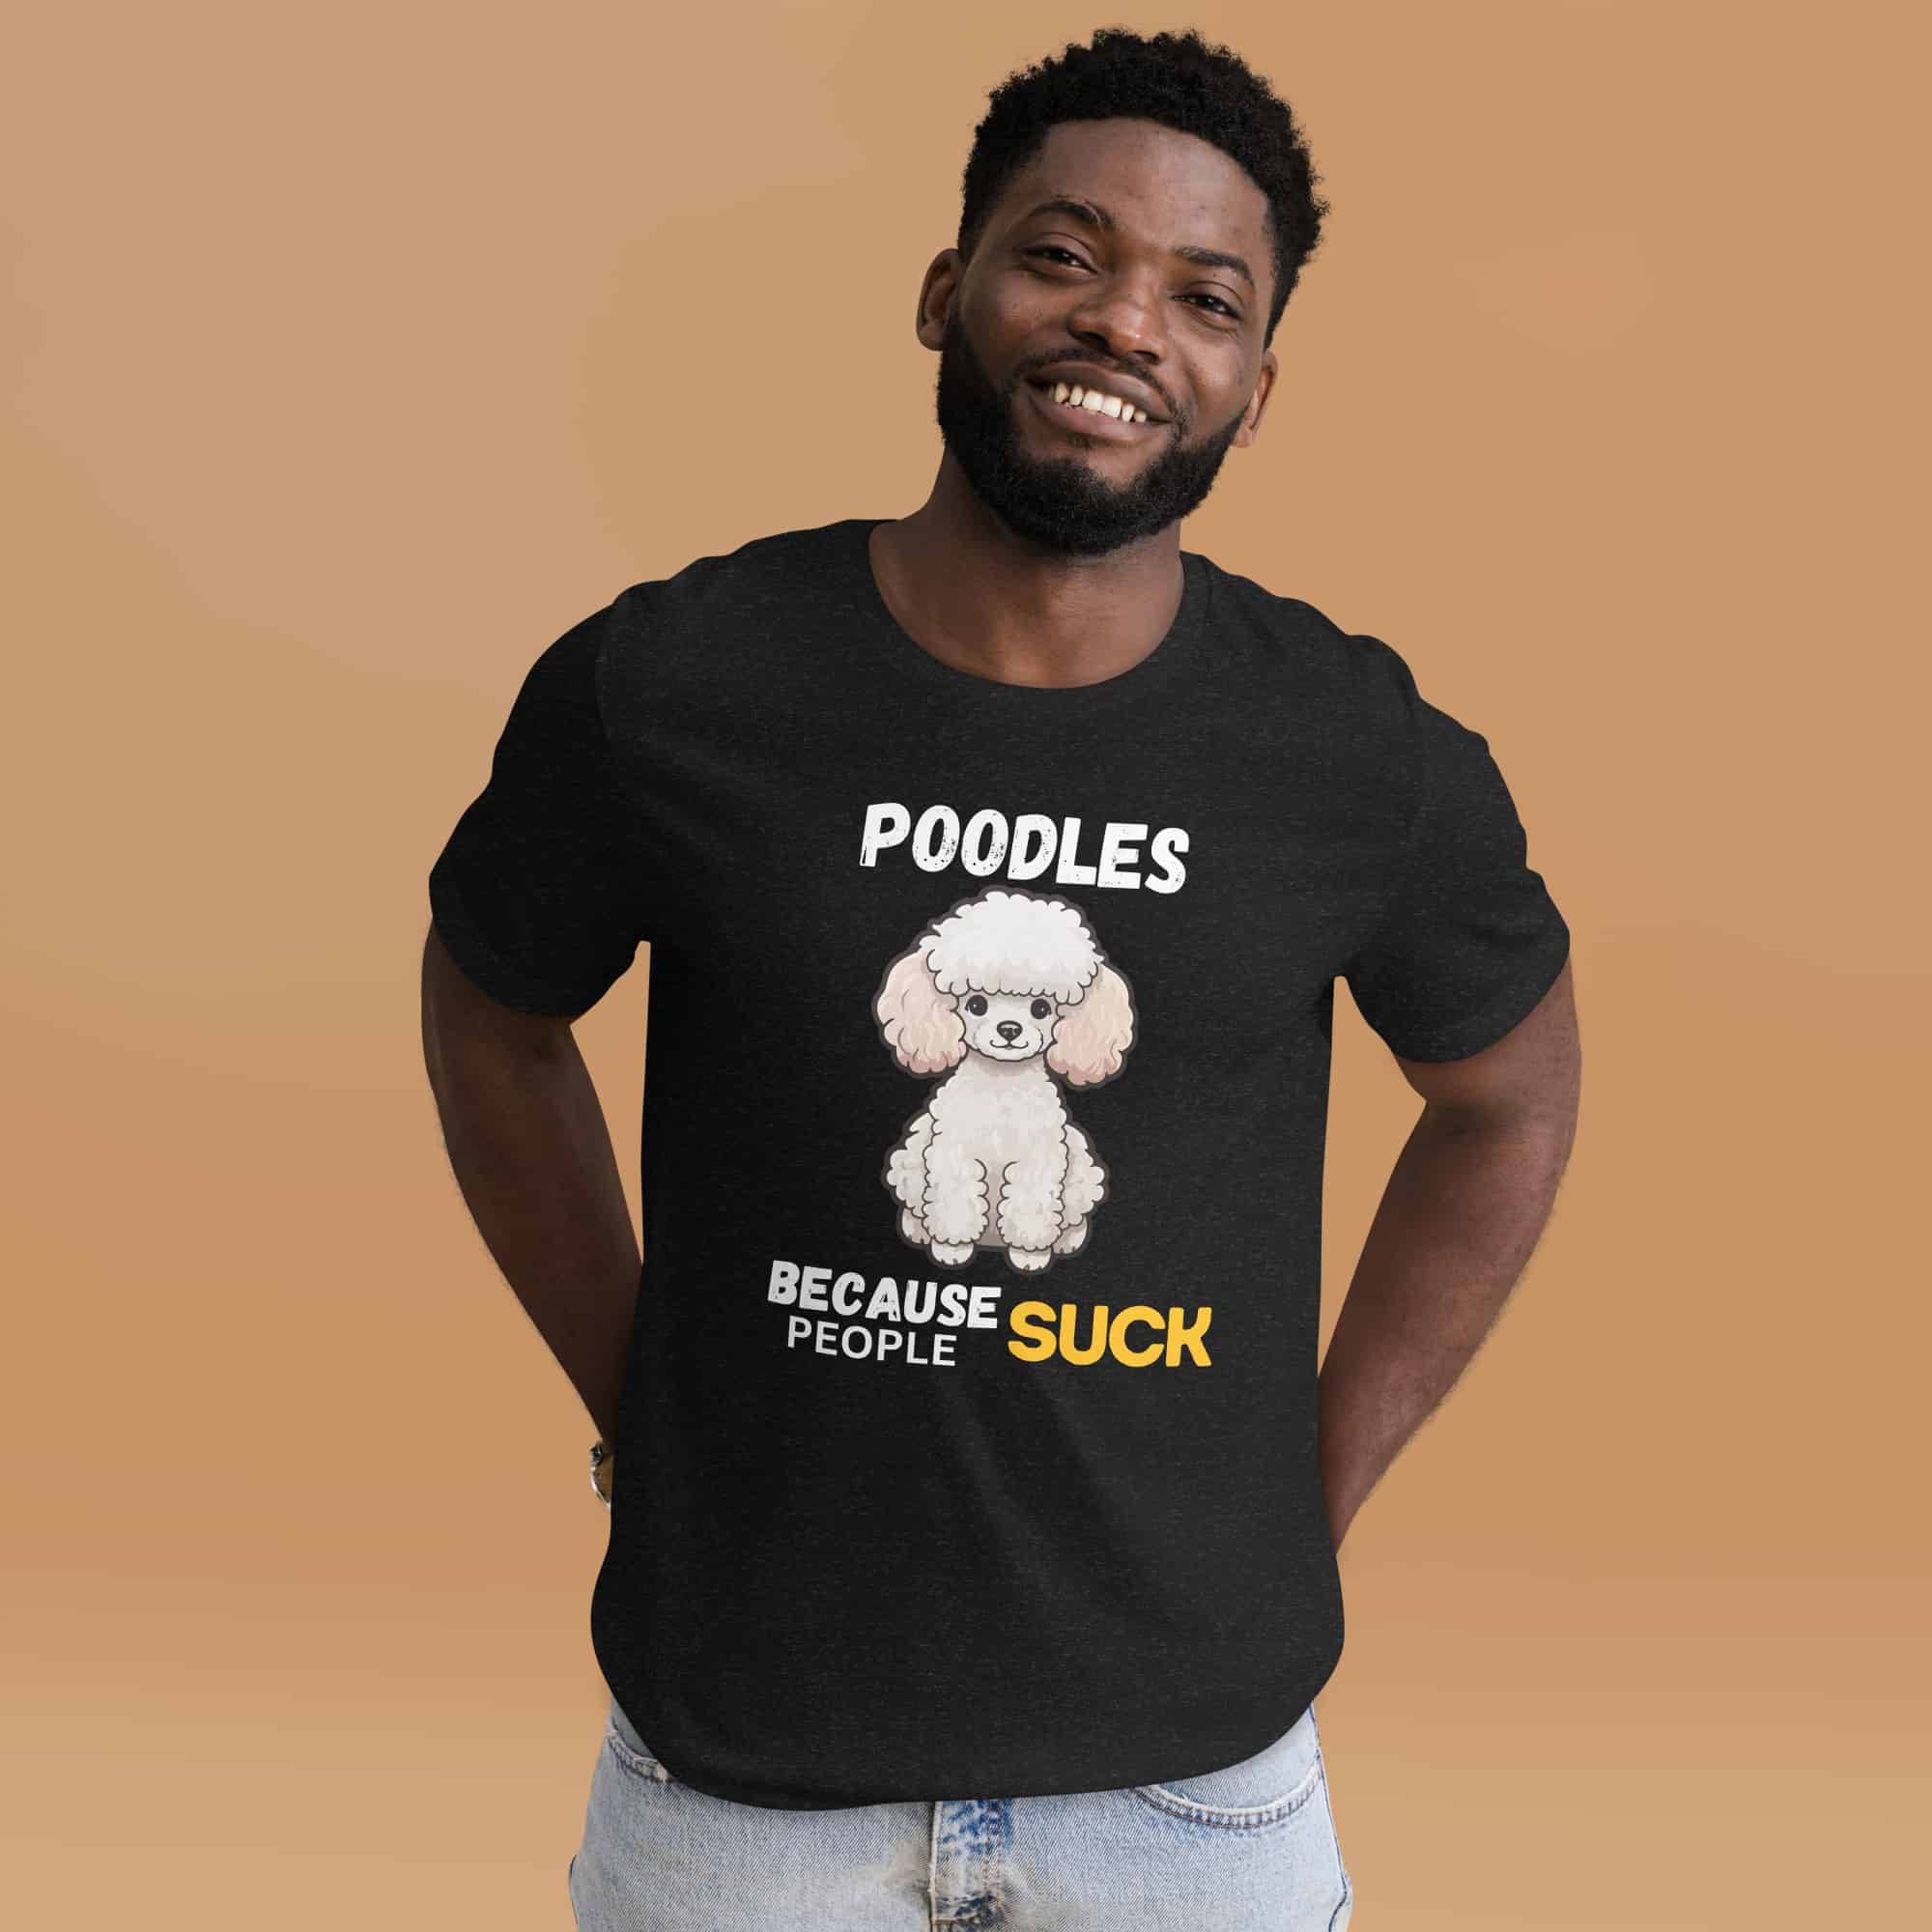 Poodles Because People Suck Unisex T-Shirt male t